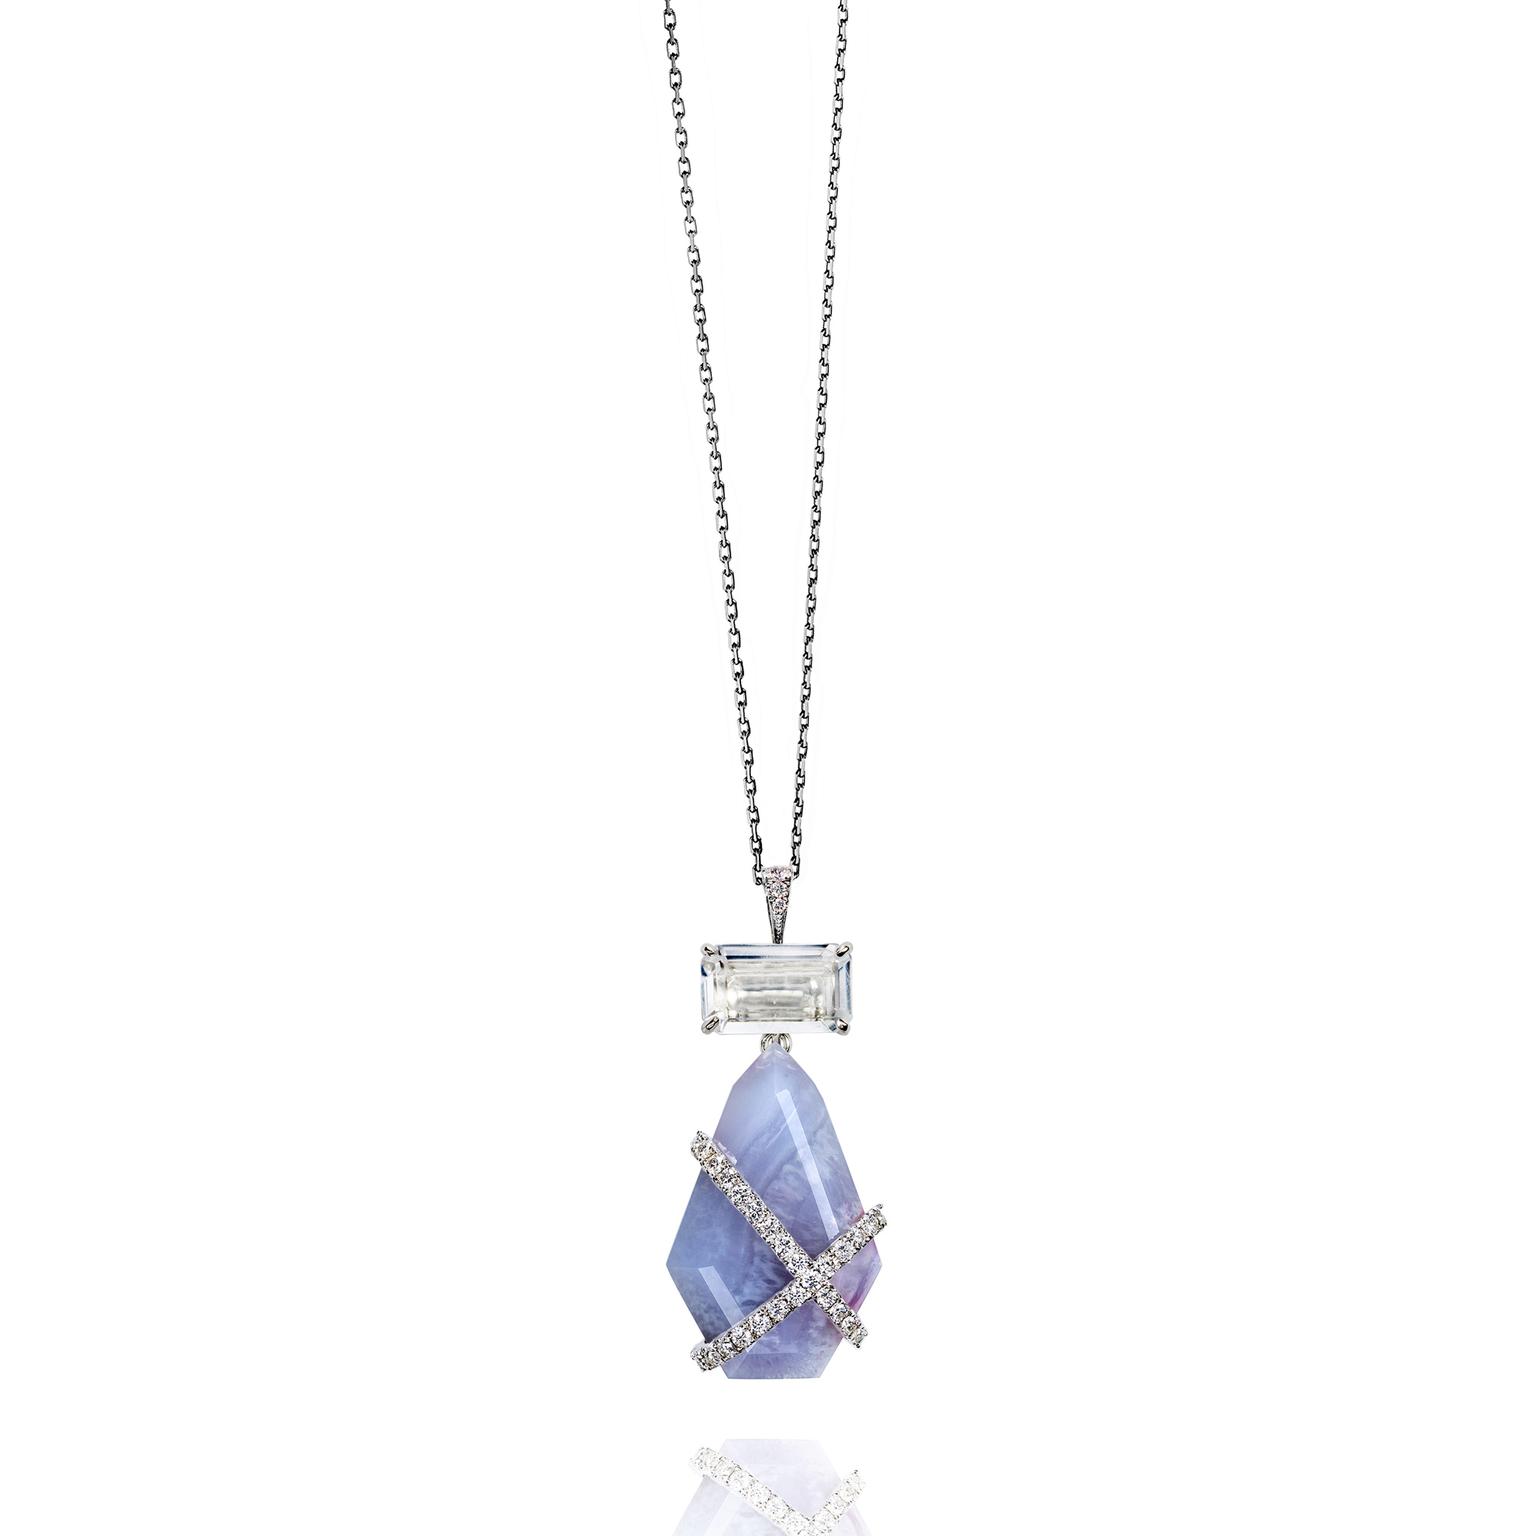 Rachael SARC white gold and chalcedony necklace